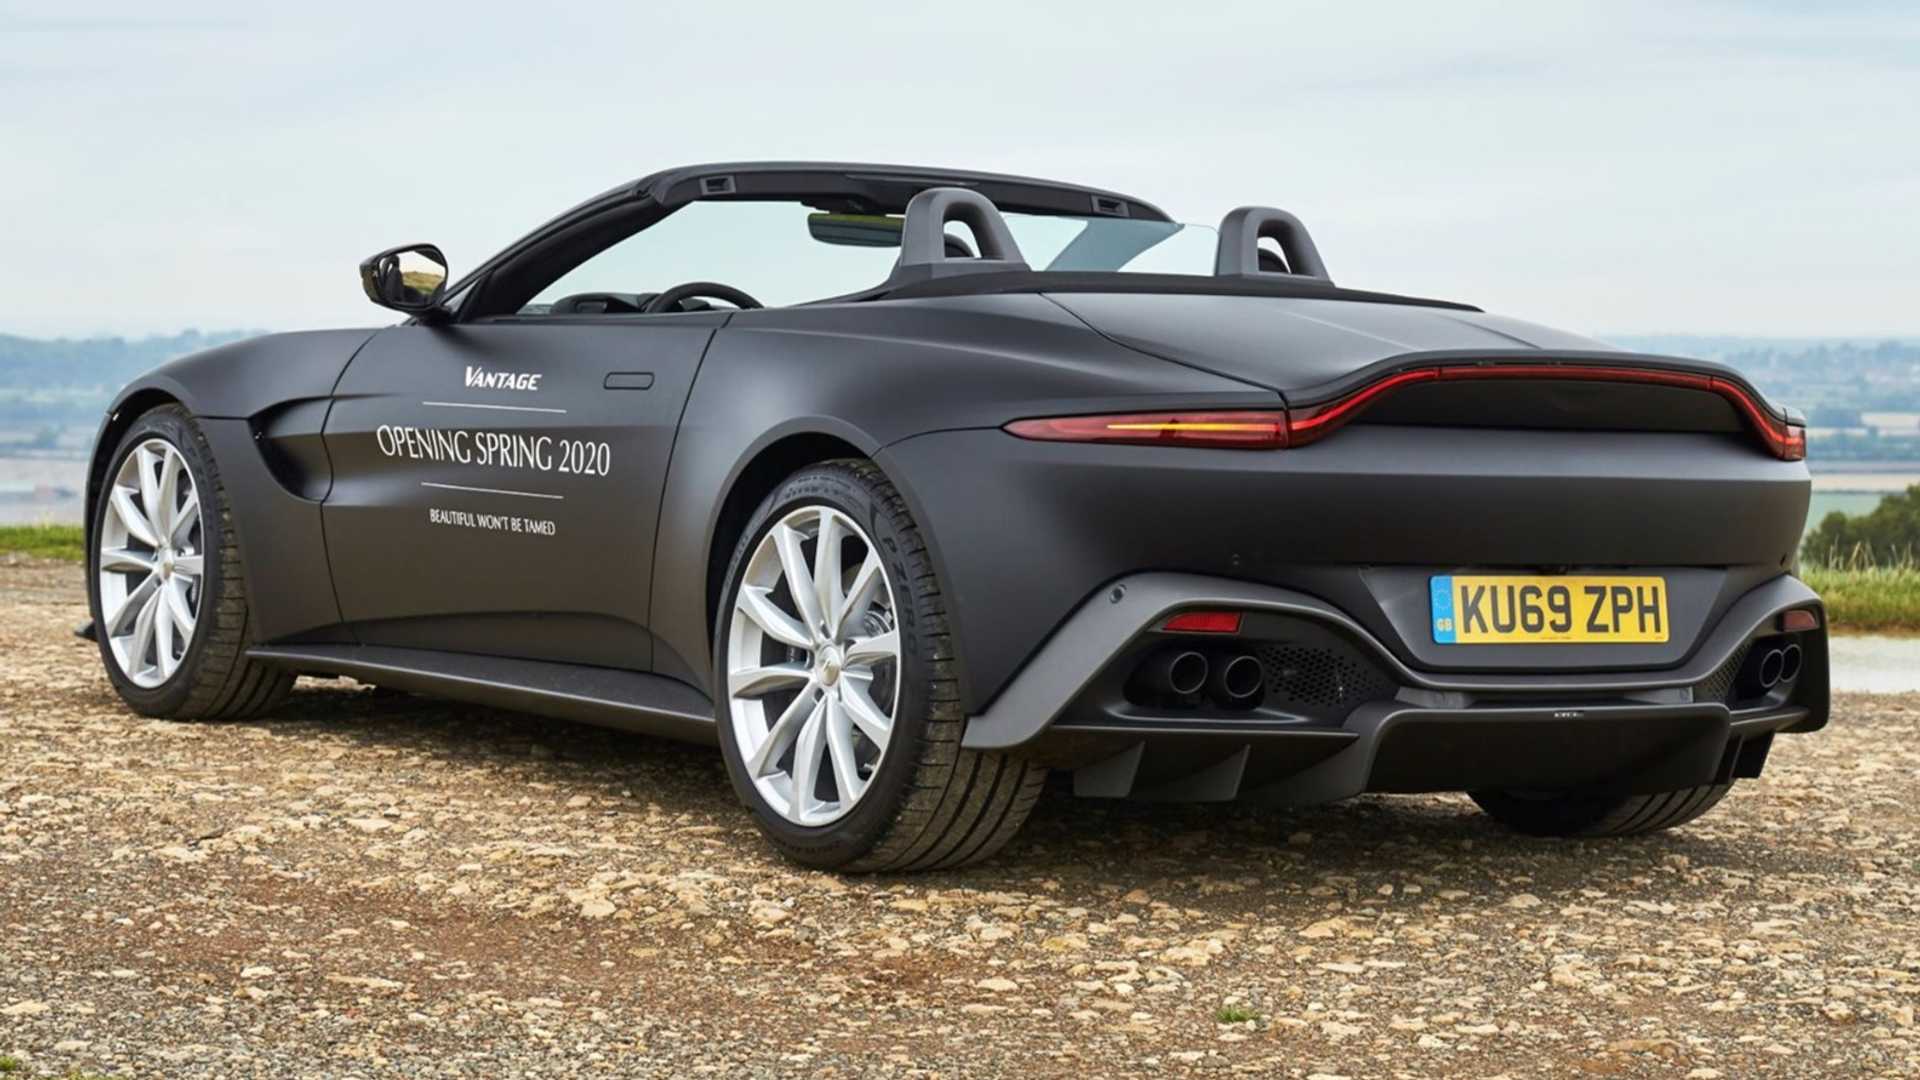 Aston Martin Vantage Roadster Preed In Official Image